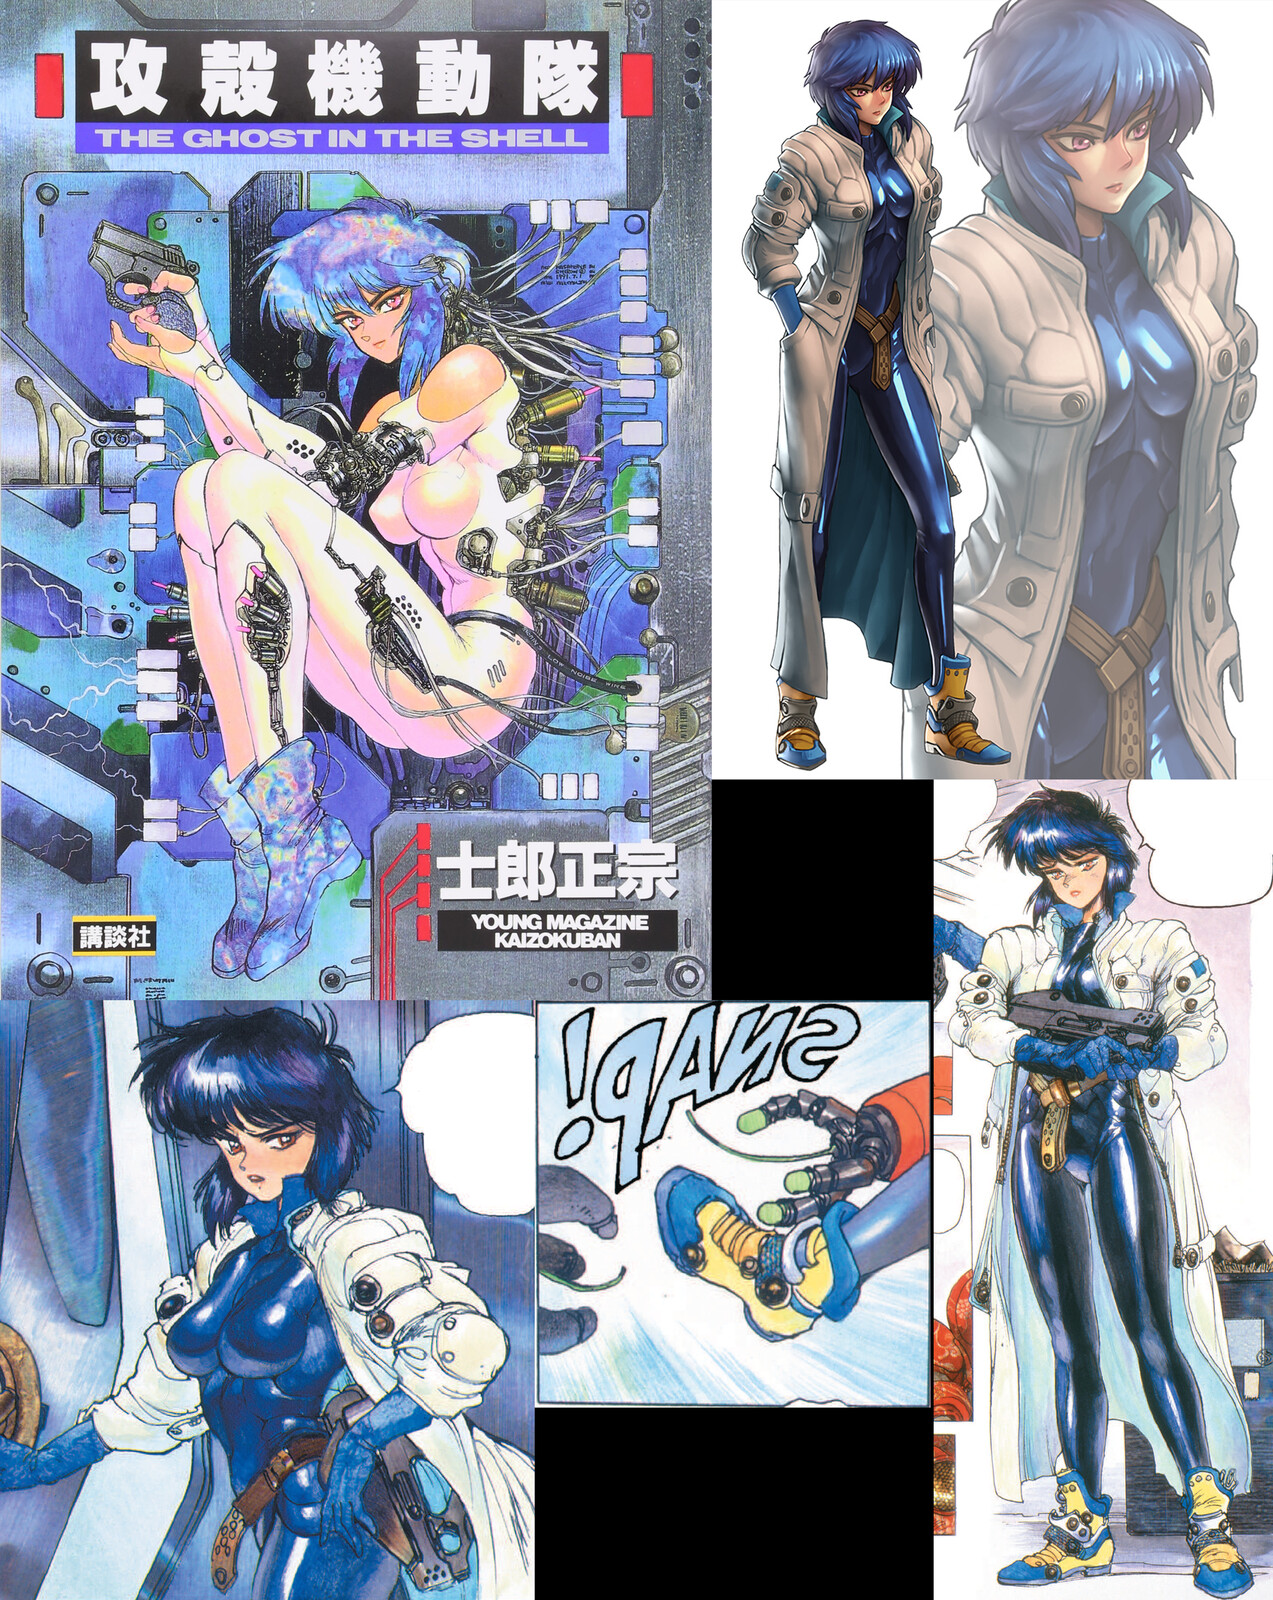 References from Shirow Masamune &amp; N-Ikegami (top right)